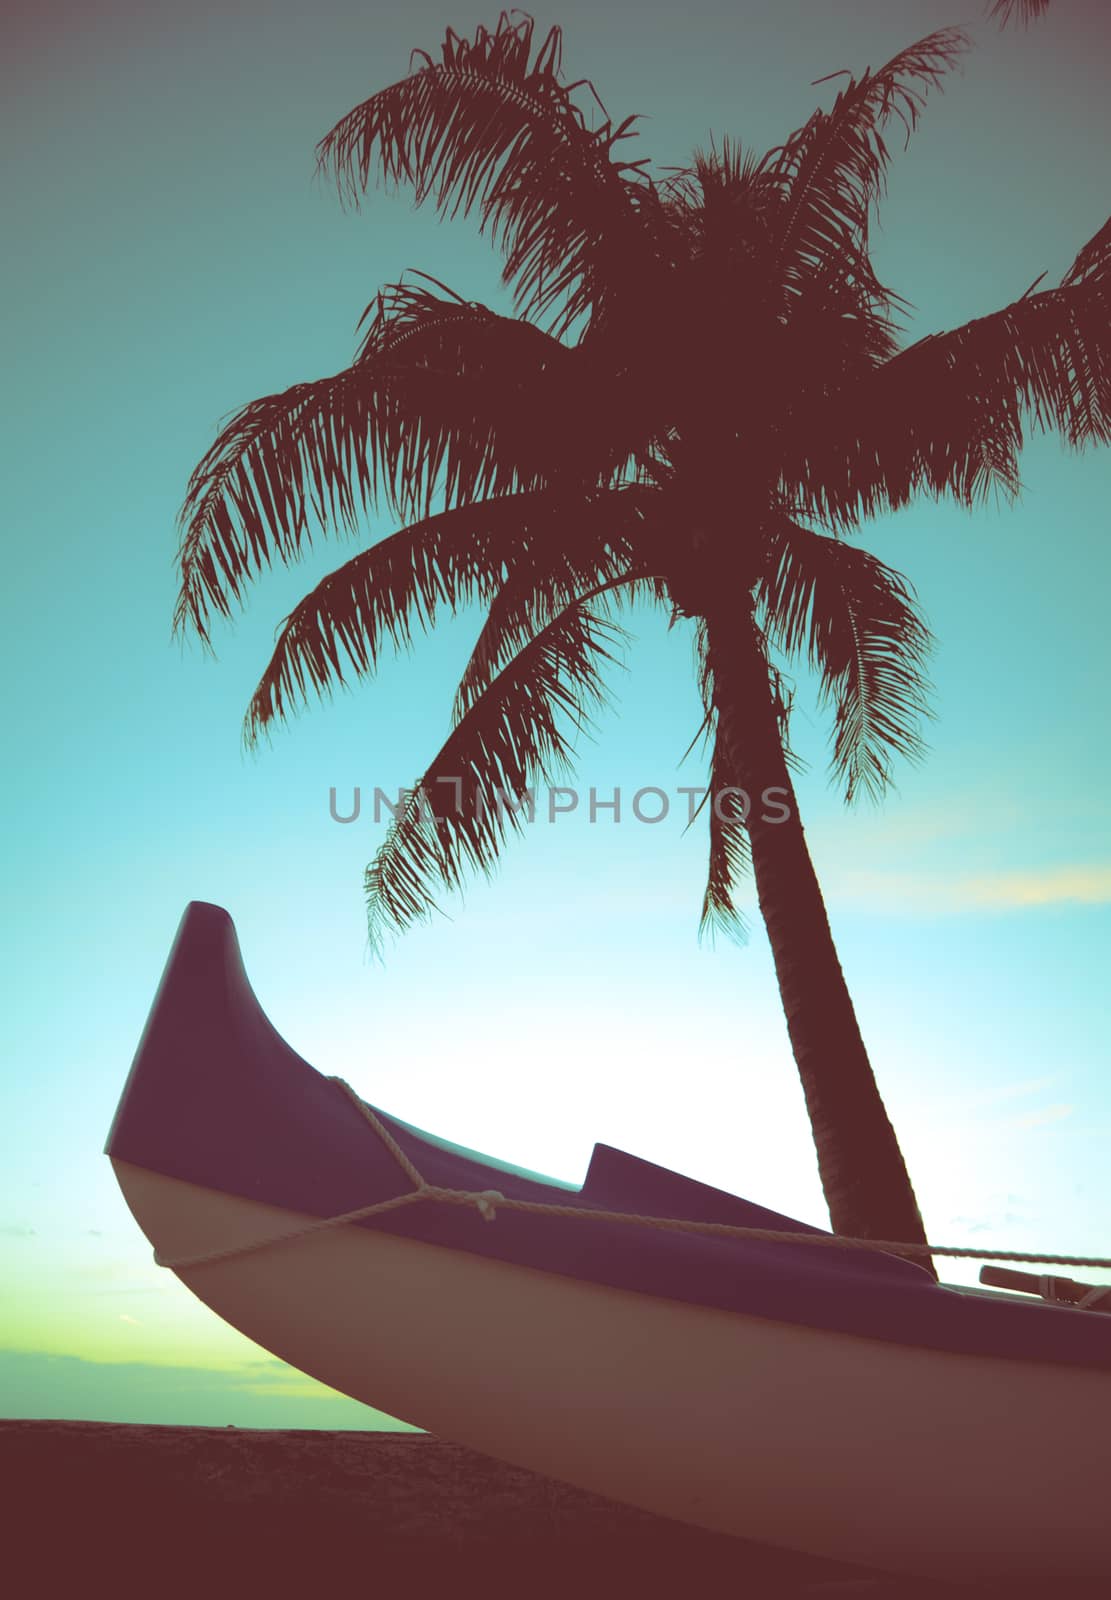 Retro Styled Photo Of Outrigger Canoe And Palm Tree In Hawaii